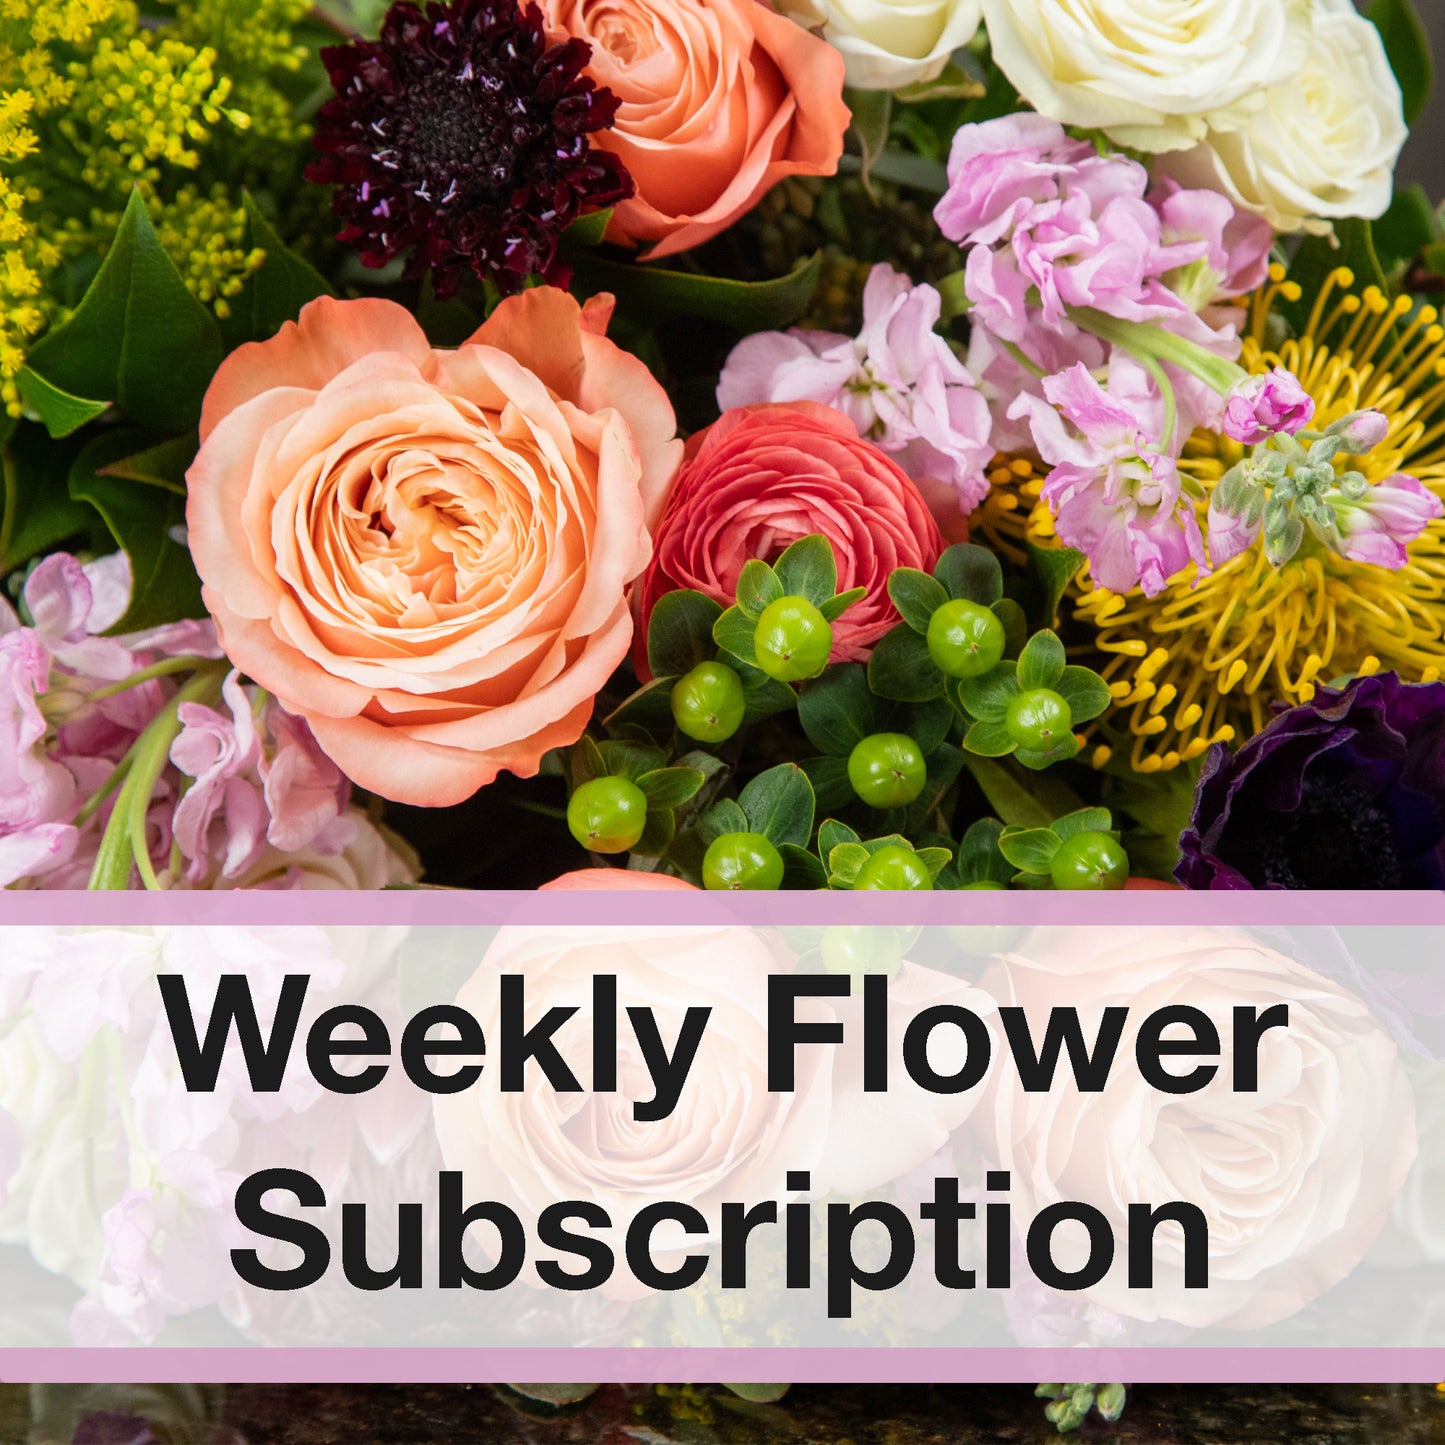 "weekly flower subscription" written below a variety of colorful flowers